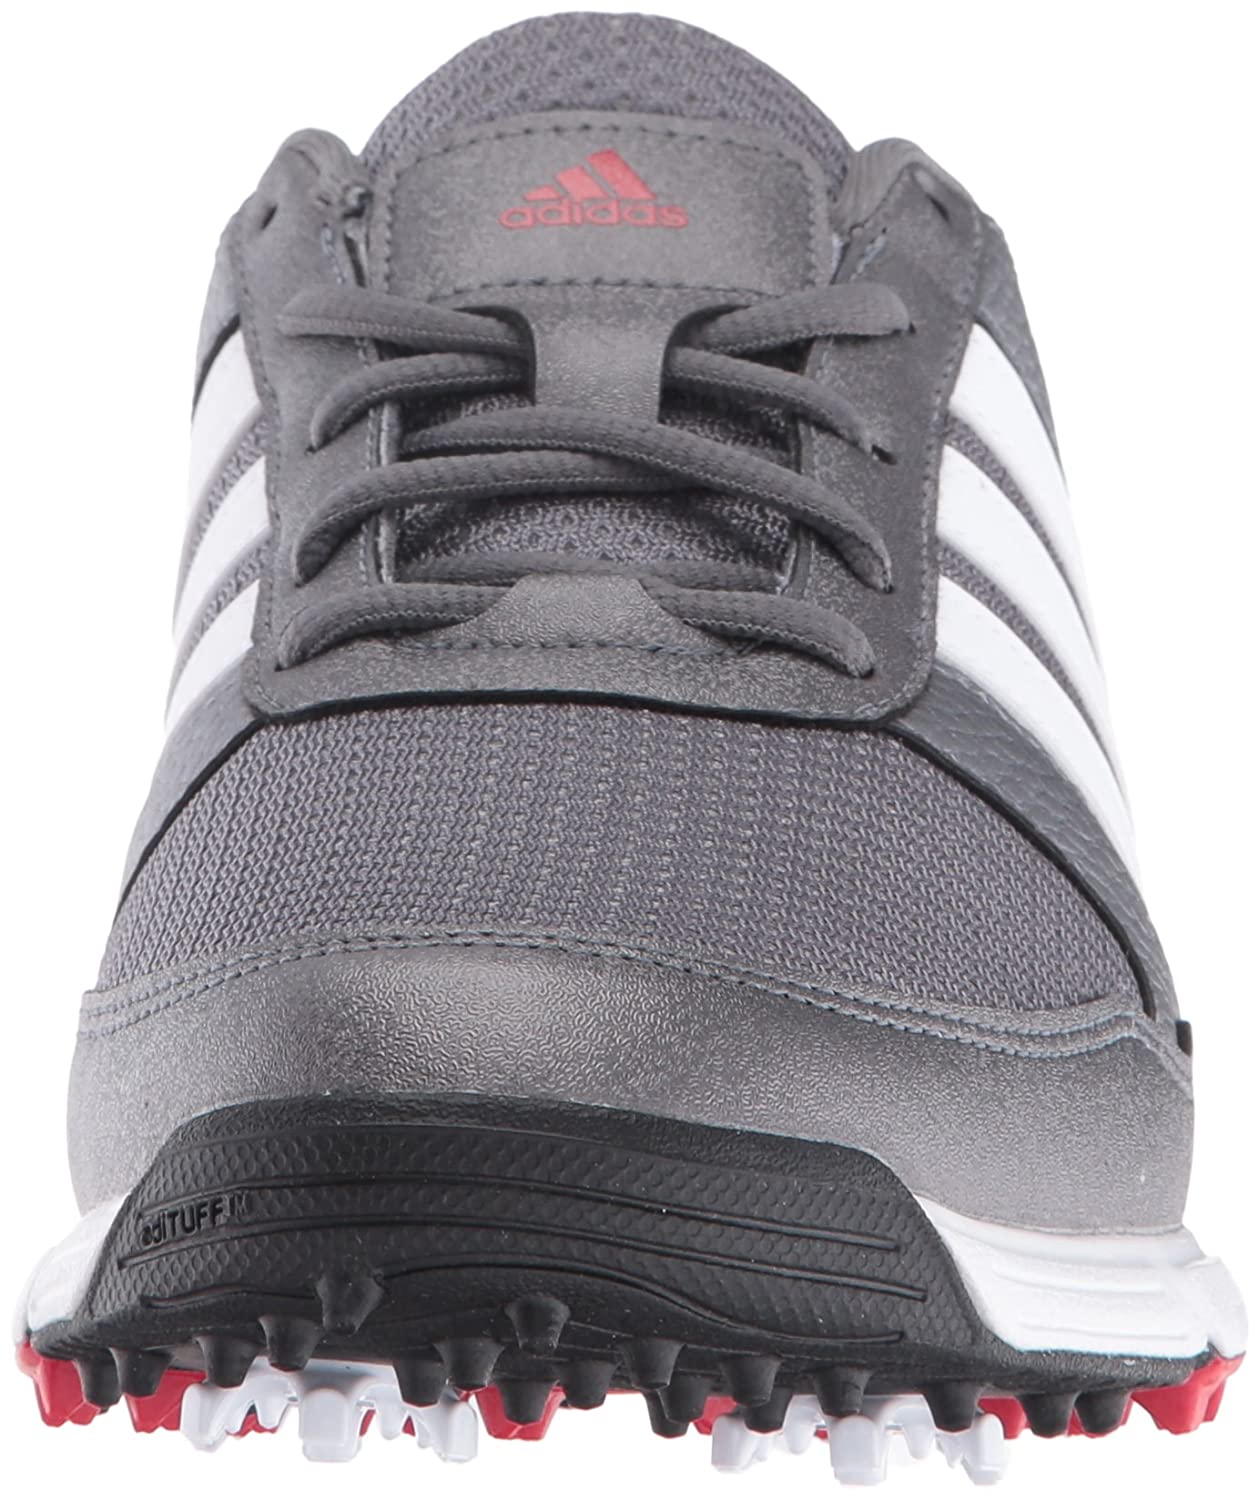 adidas men's tech response 4. wd golf cleated